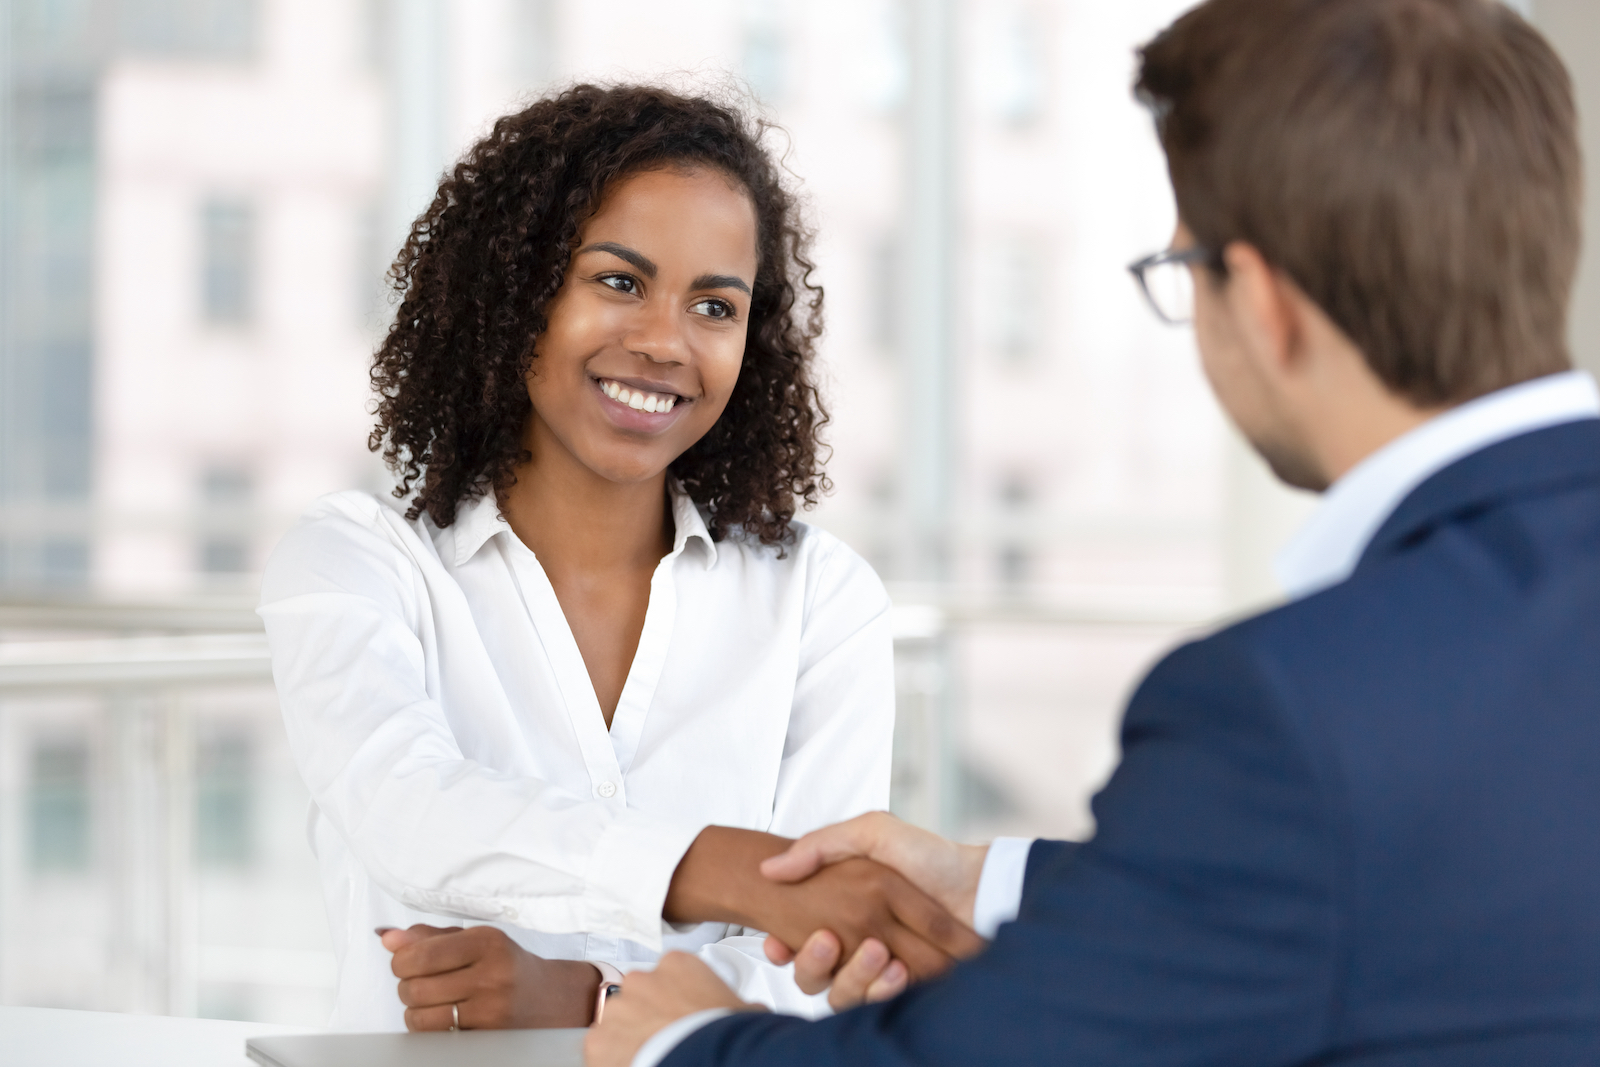 2021 Job Interview Statistics to Know Before Your Interview